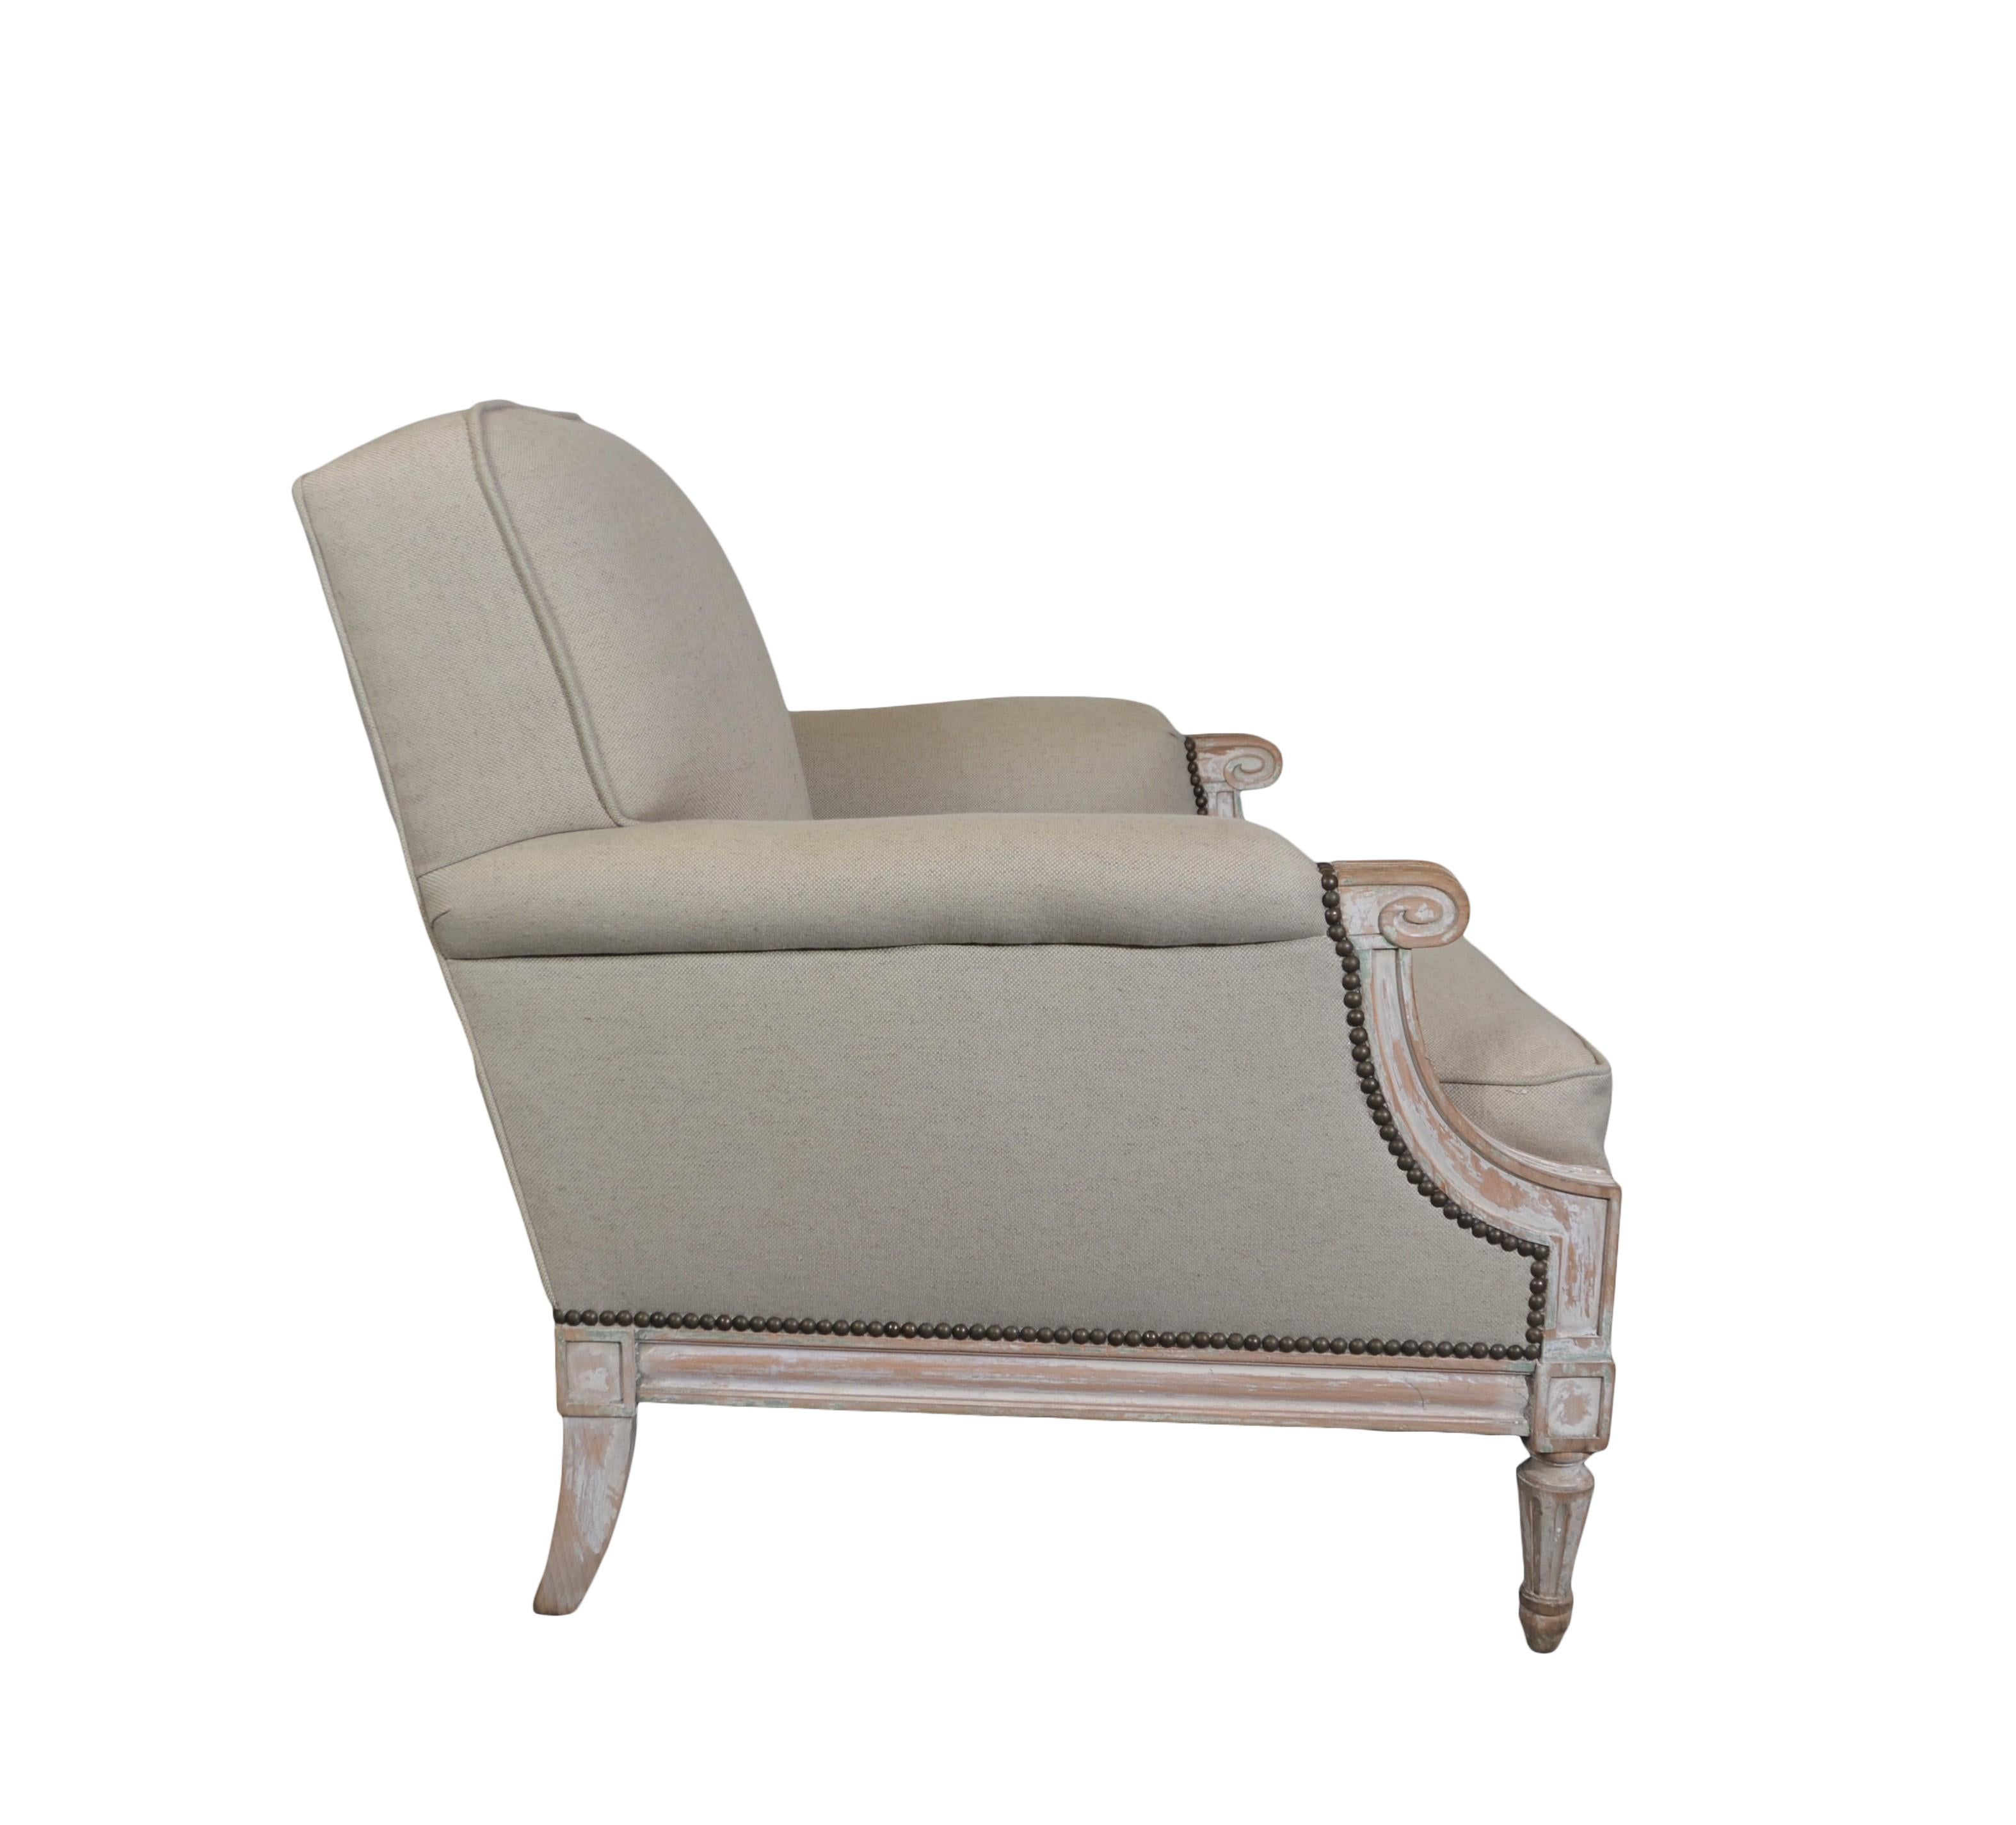 Louis XVI Style Club Chairs In Good Condition For Sale In Pomona, CA